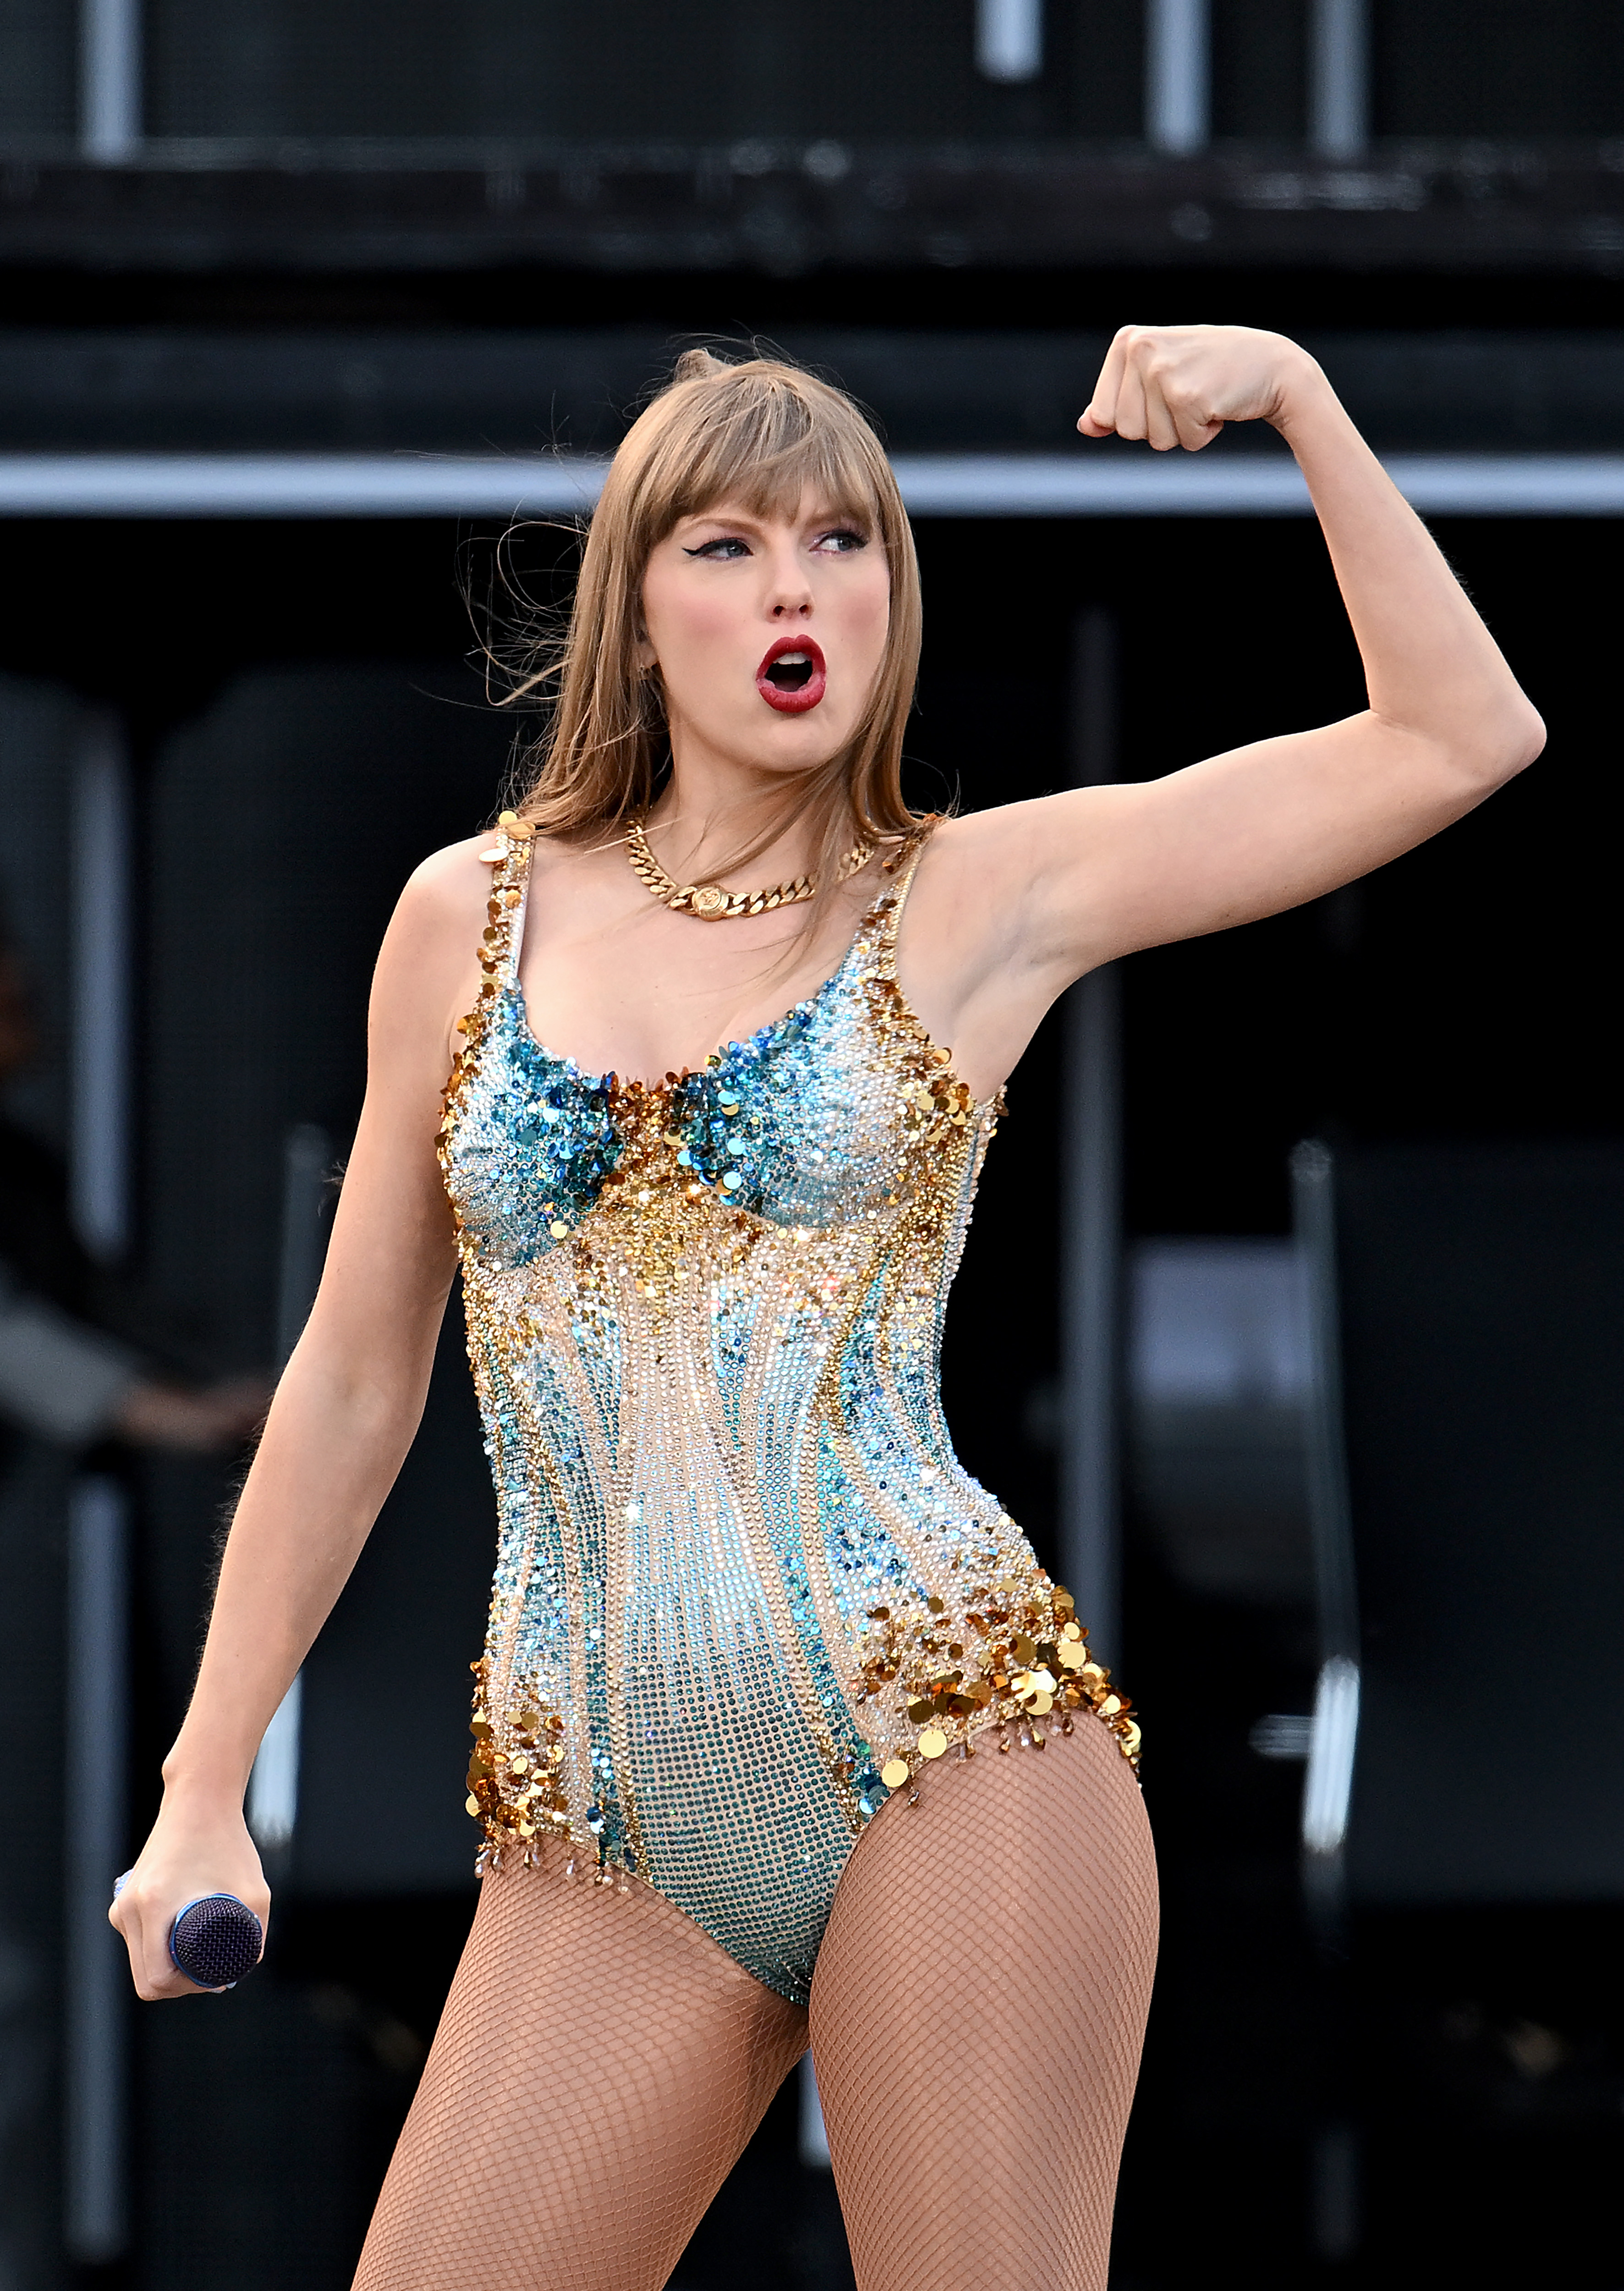 Fans believe Taylor Swift could make a cameo in the movie